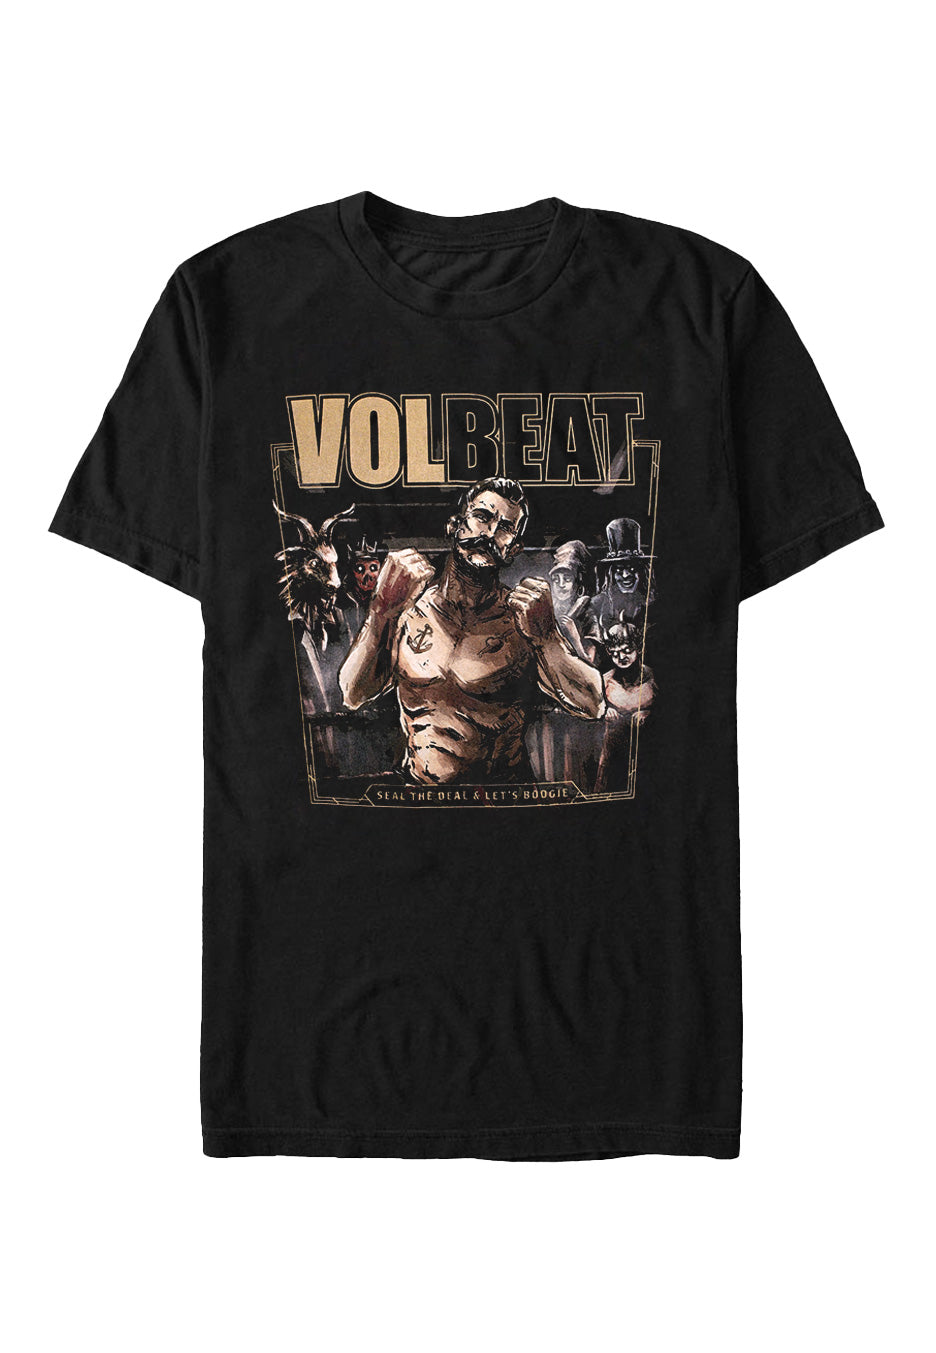 Volbeat - Seal The Deal Cover - T-Shirt